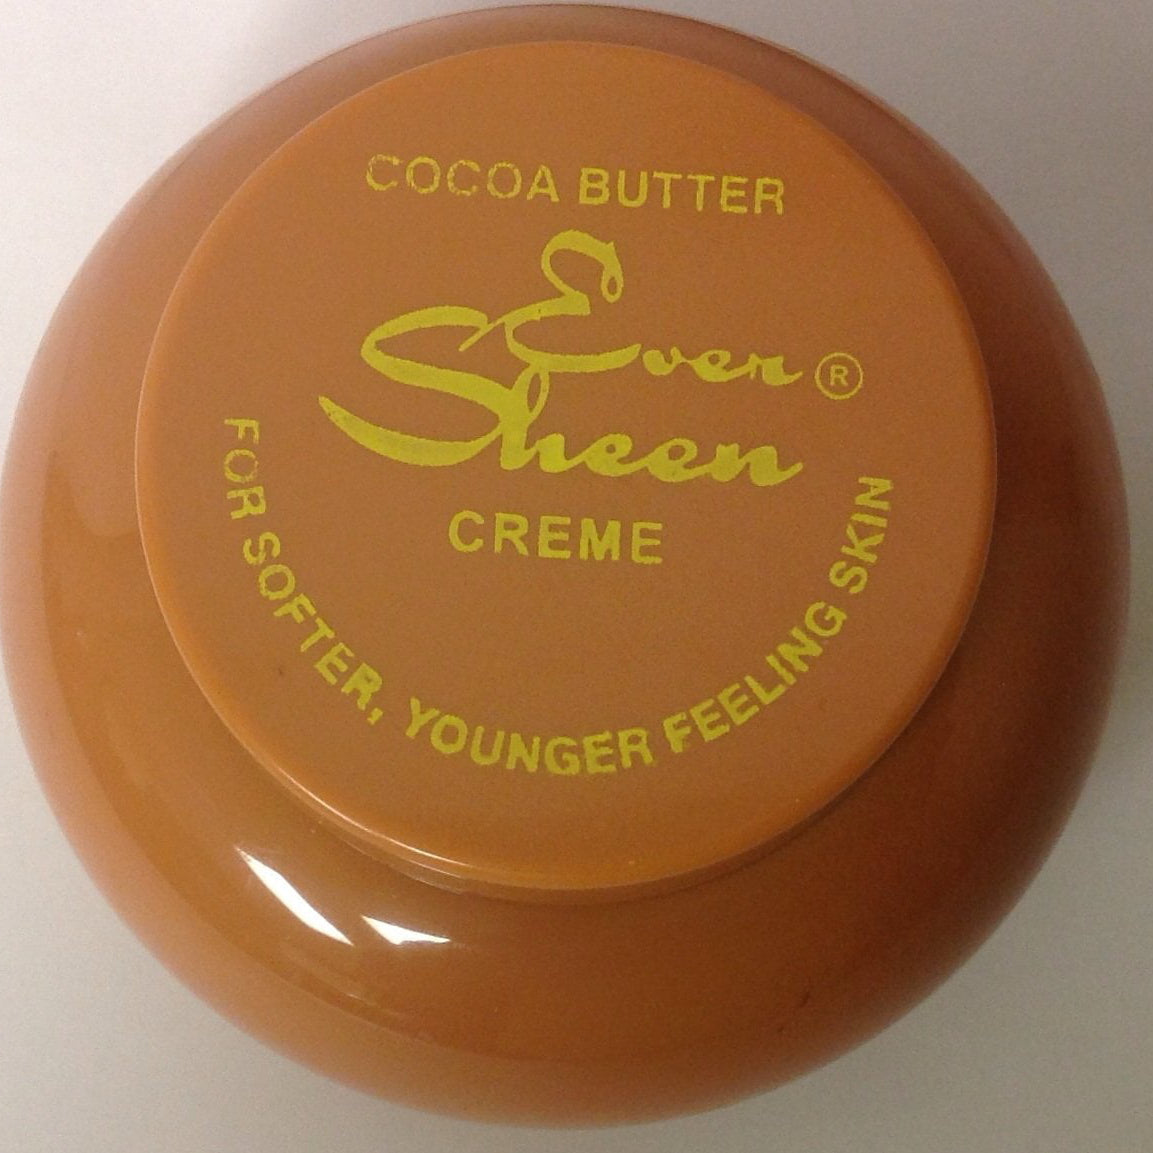 Ever Sheen Cocoa Butter Creme 8.5oz by Siparco Si